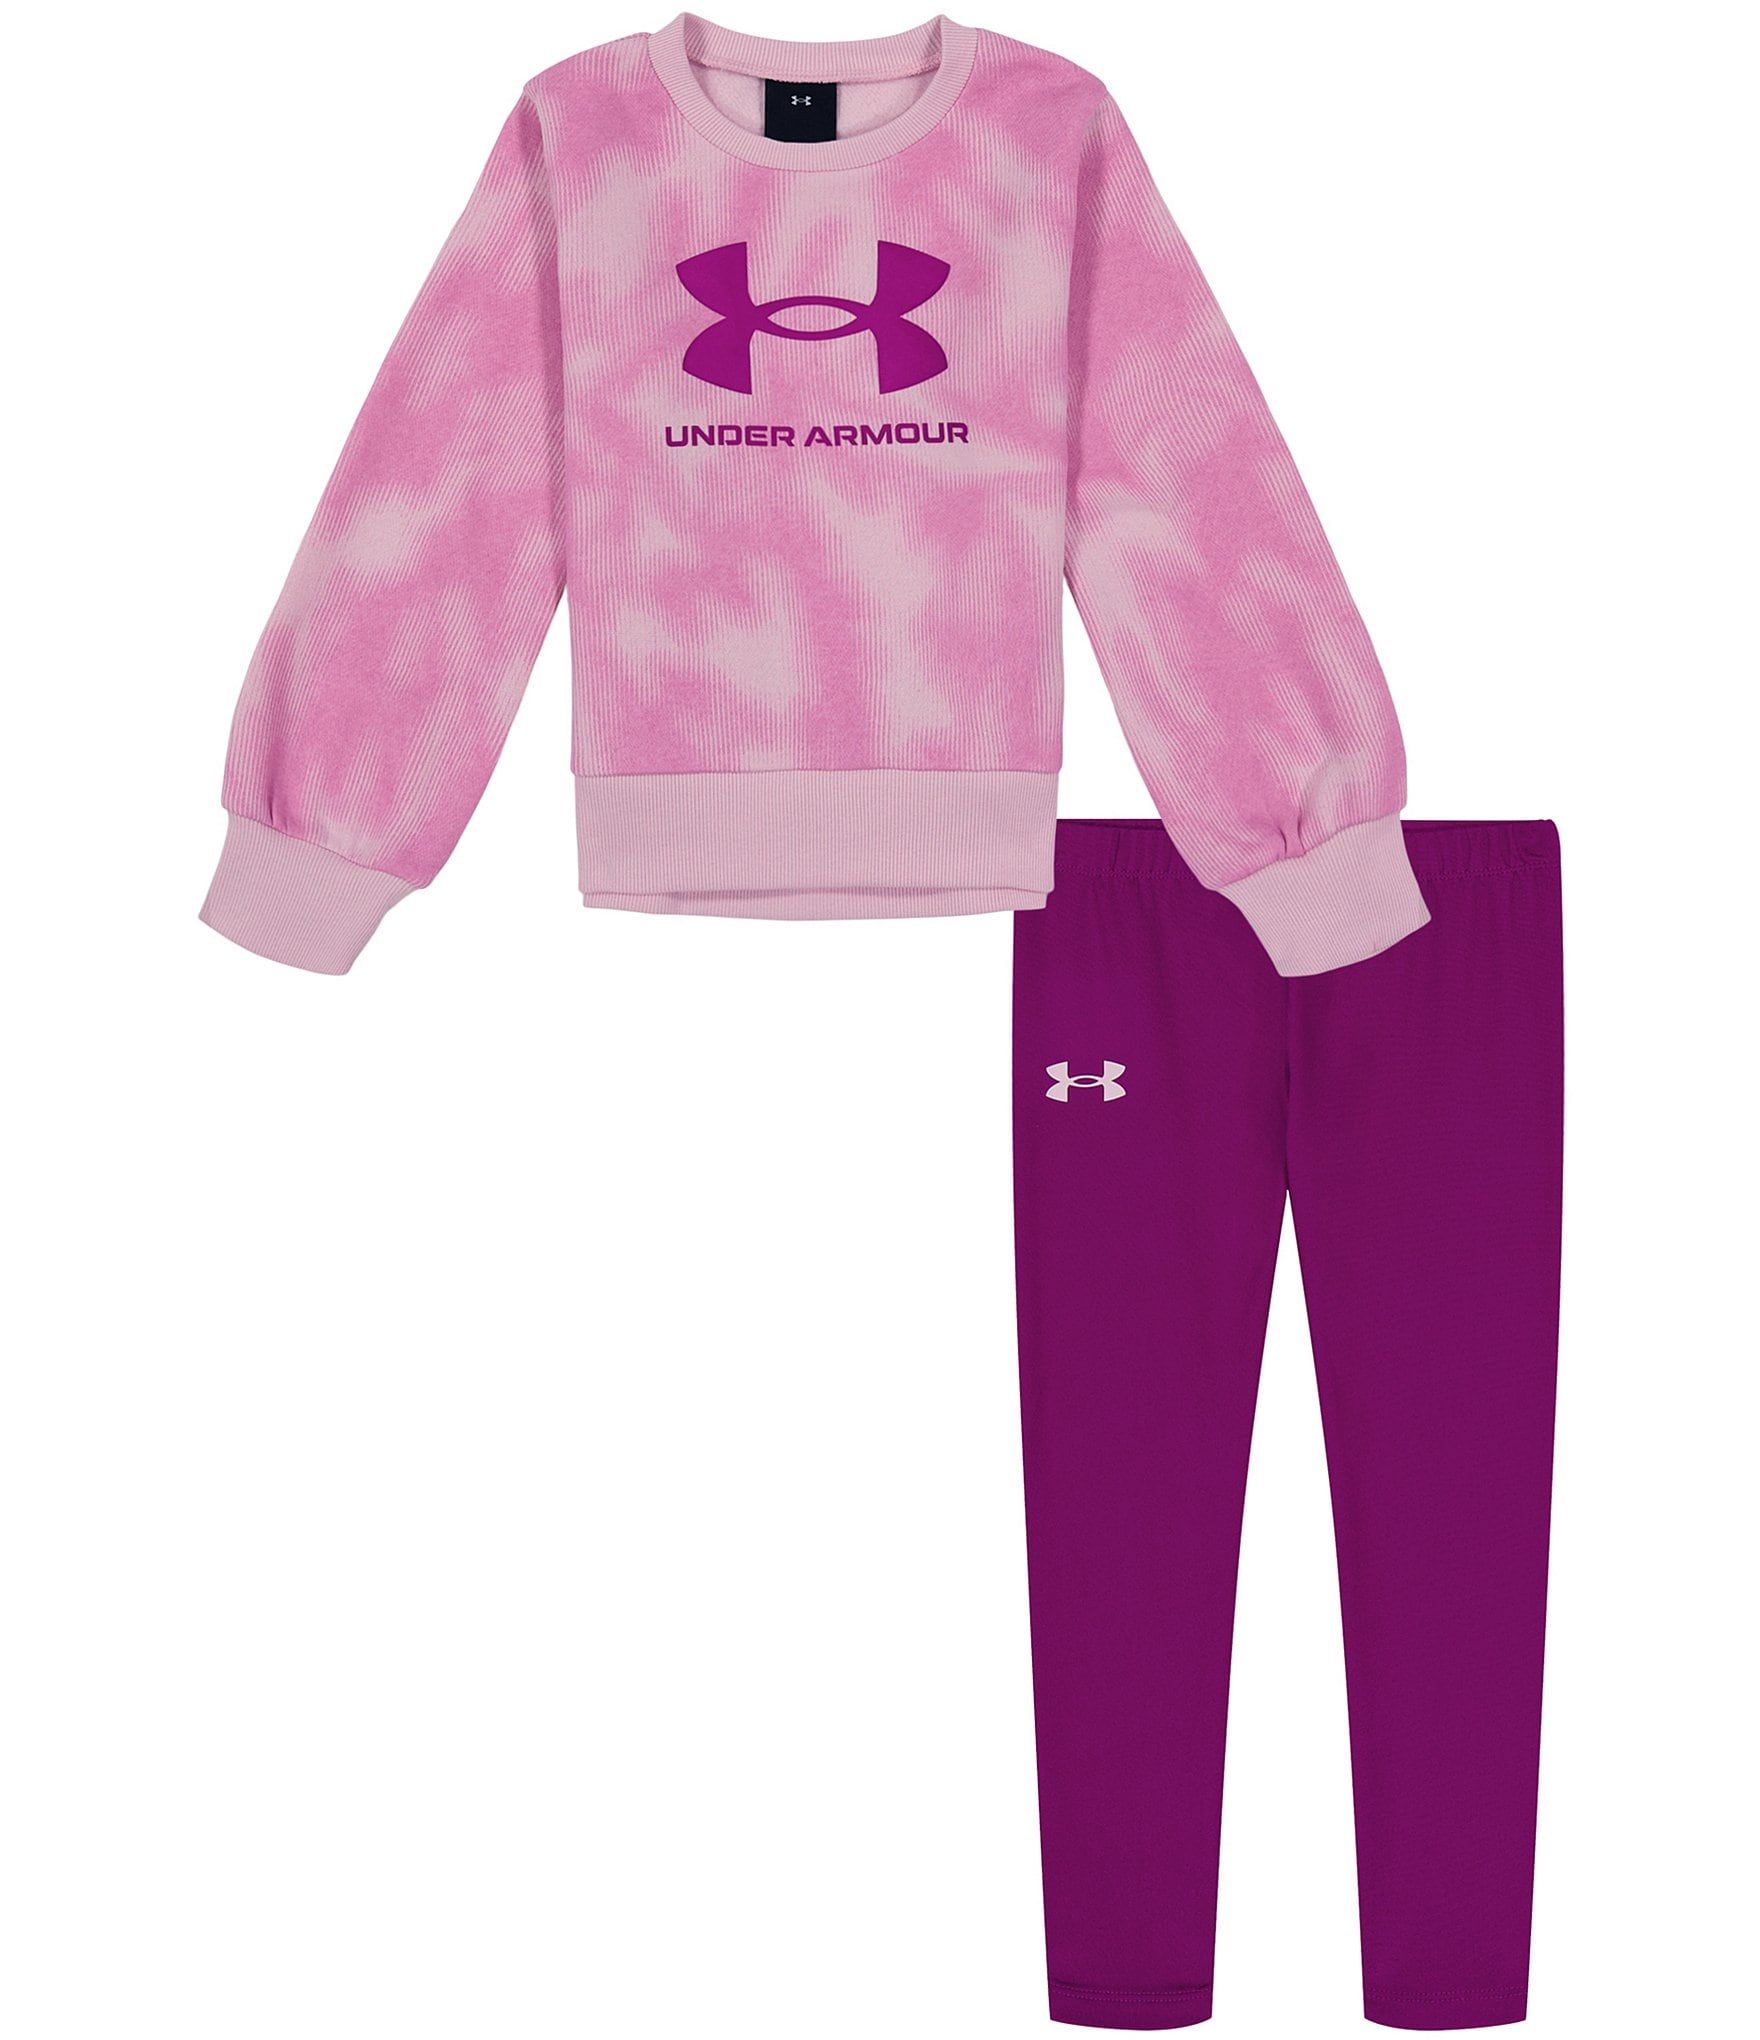 Under Armour Little Girls 2T-6X Long-Sleeve Abstract-Printed